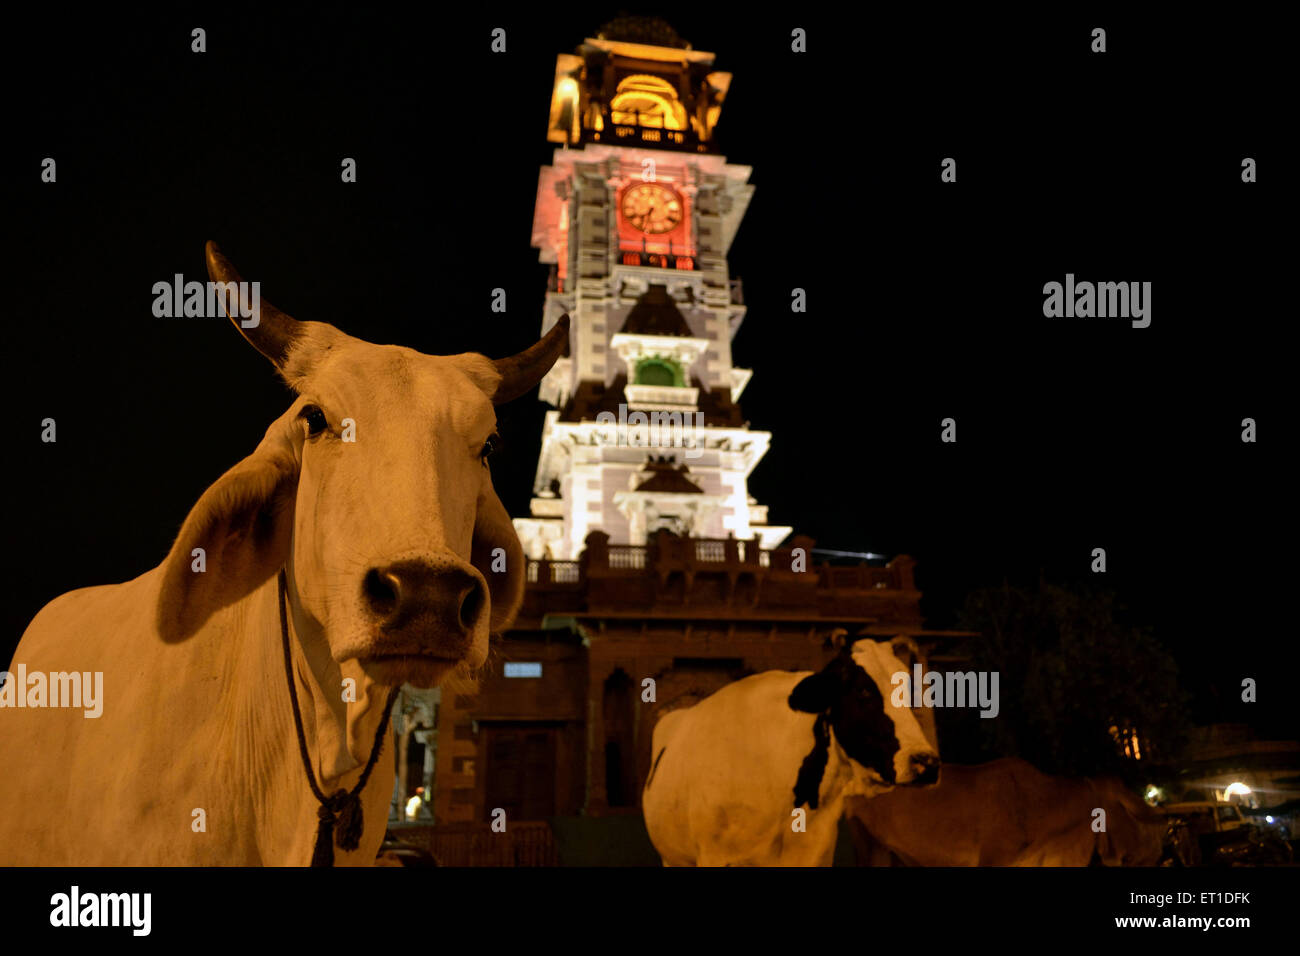 Cows are standing in front of Illuminated Ghanta ghar Jodhpur Rajasthan India Asia Stock Photo